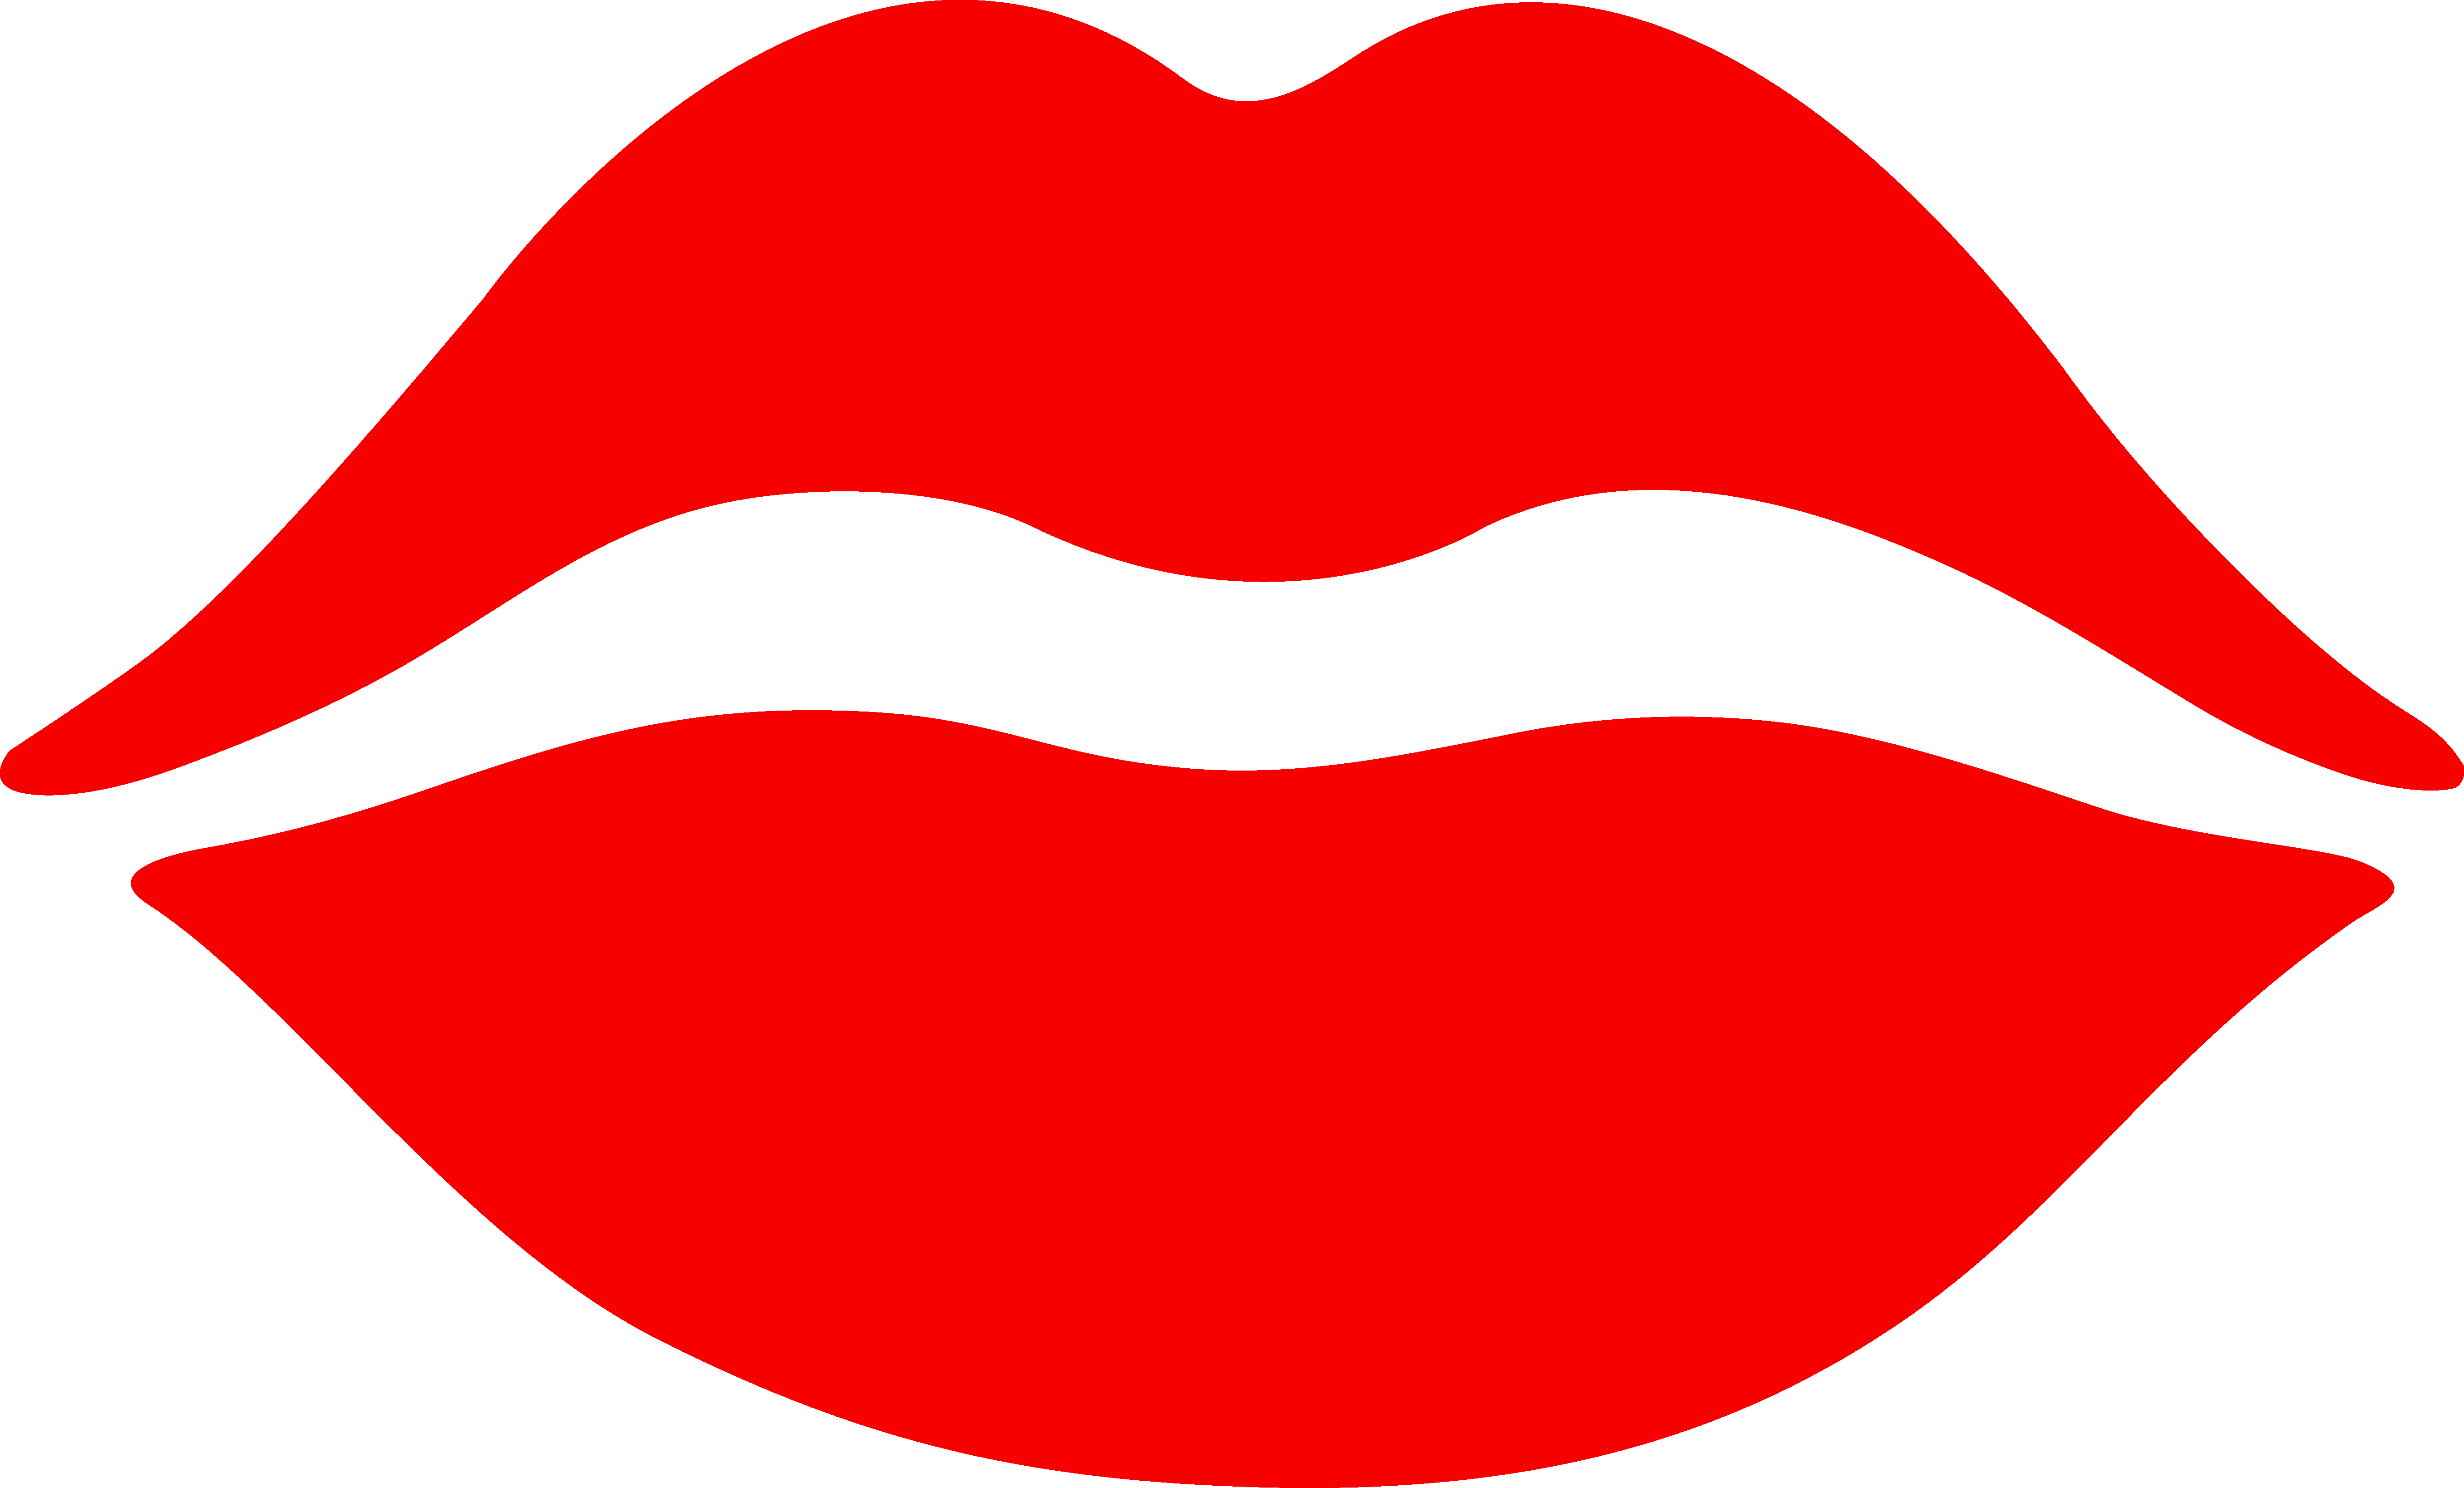 Red Lips and Mouth Logo - Free Cartoon Lips Kiss, Download Free Clip Art, Free Clip Art on ...